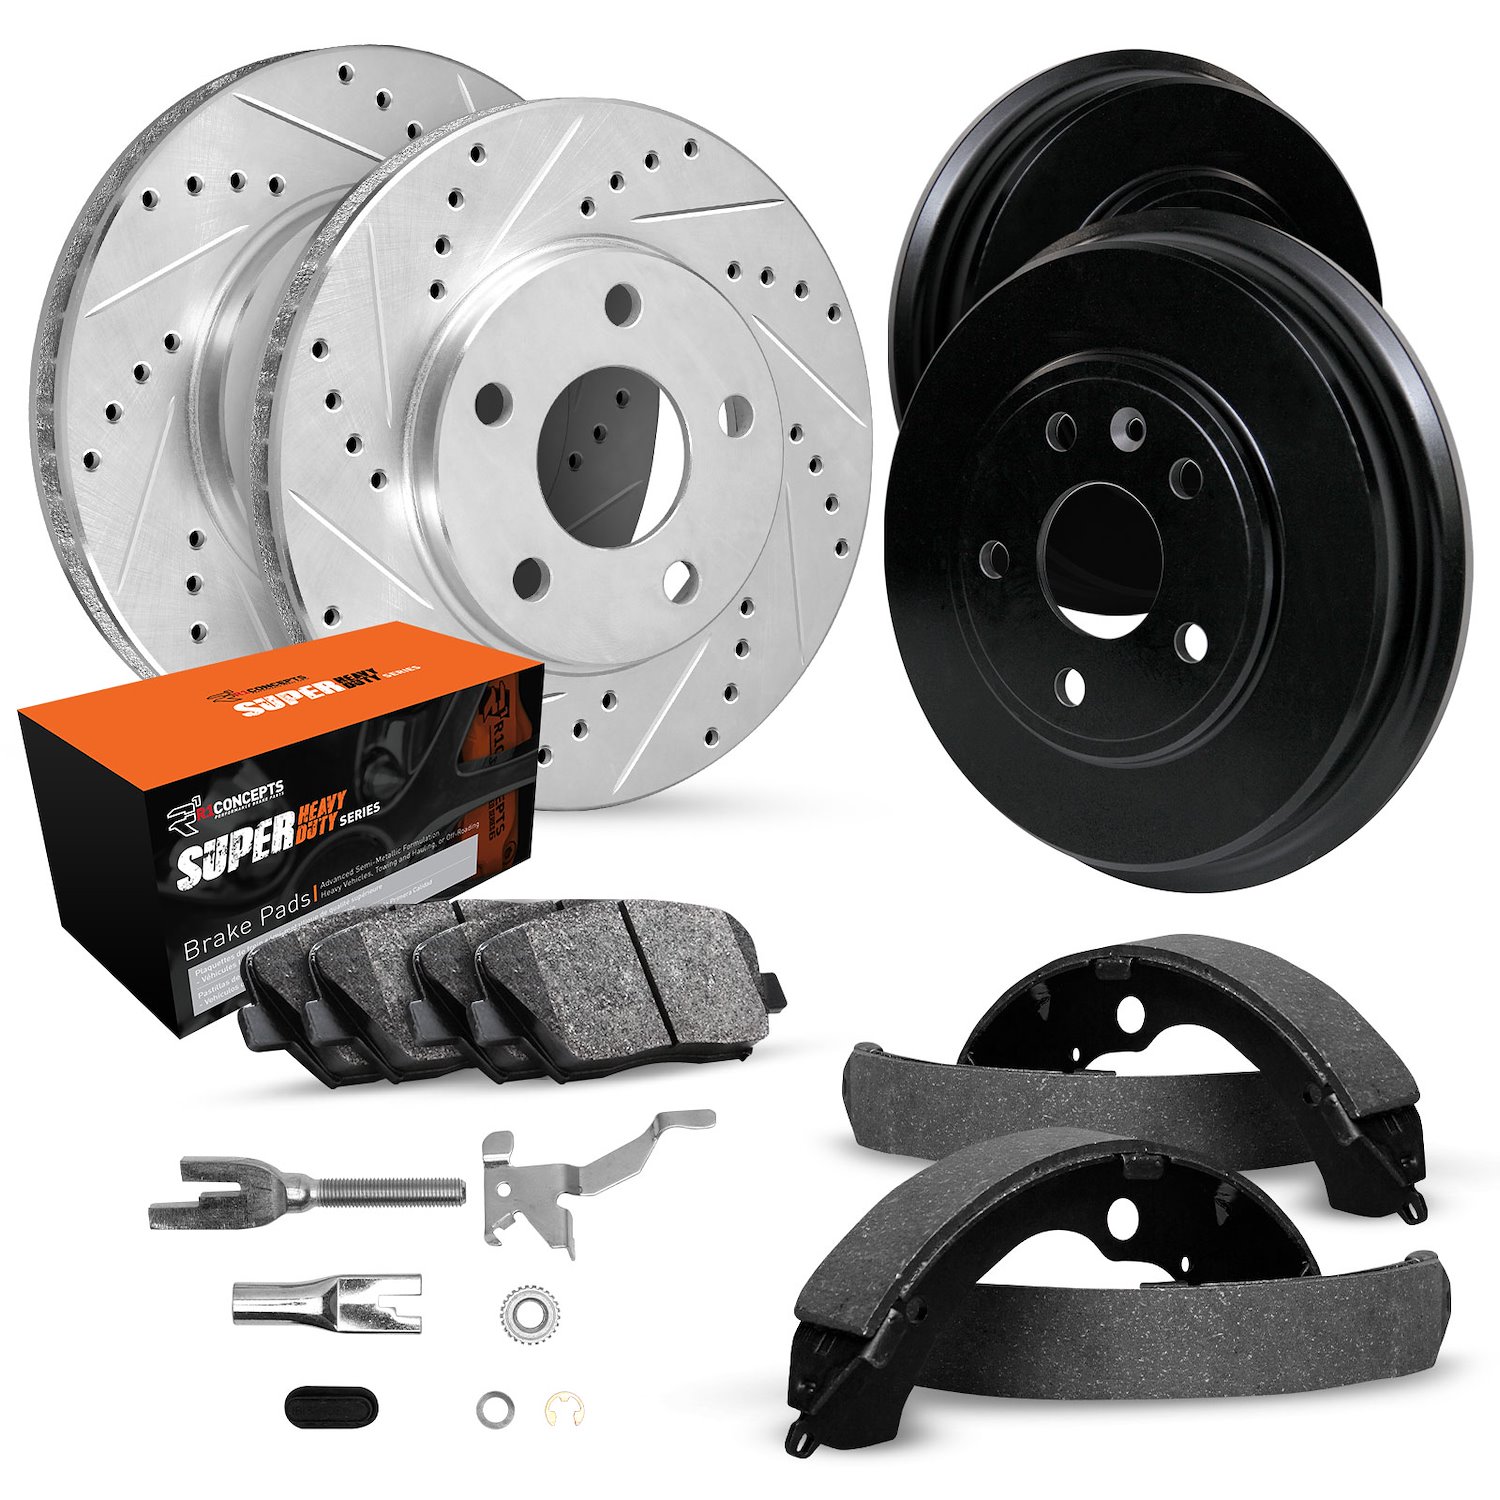 E-Line Drilled & Slotted Silver Brake Rotor & Drum Set w/Super-Duty Pads, Shoes, & Adjusters, 1977-1991 GM